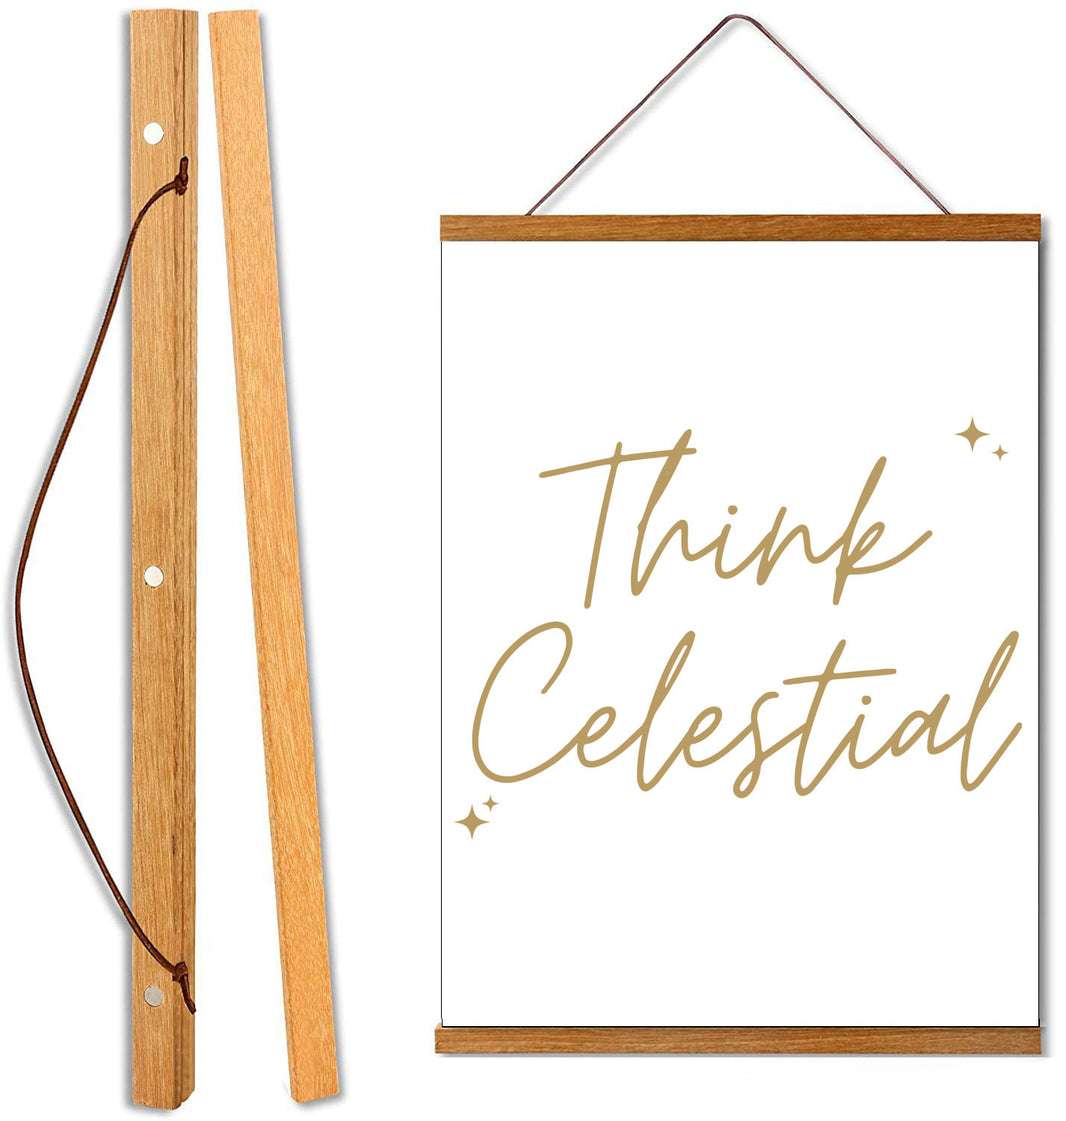 Think Celestial Hanging Canvas